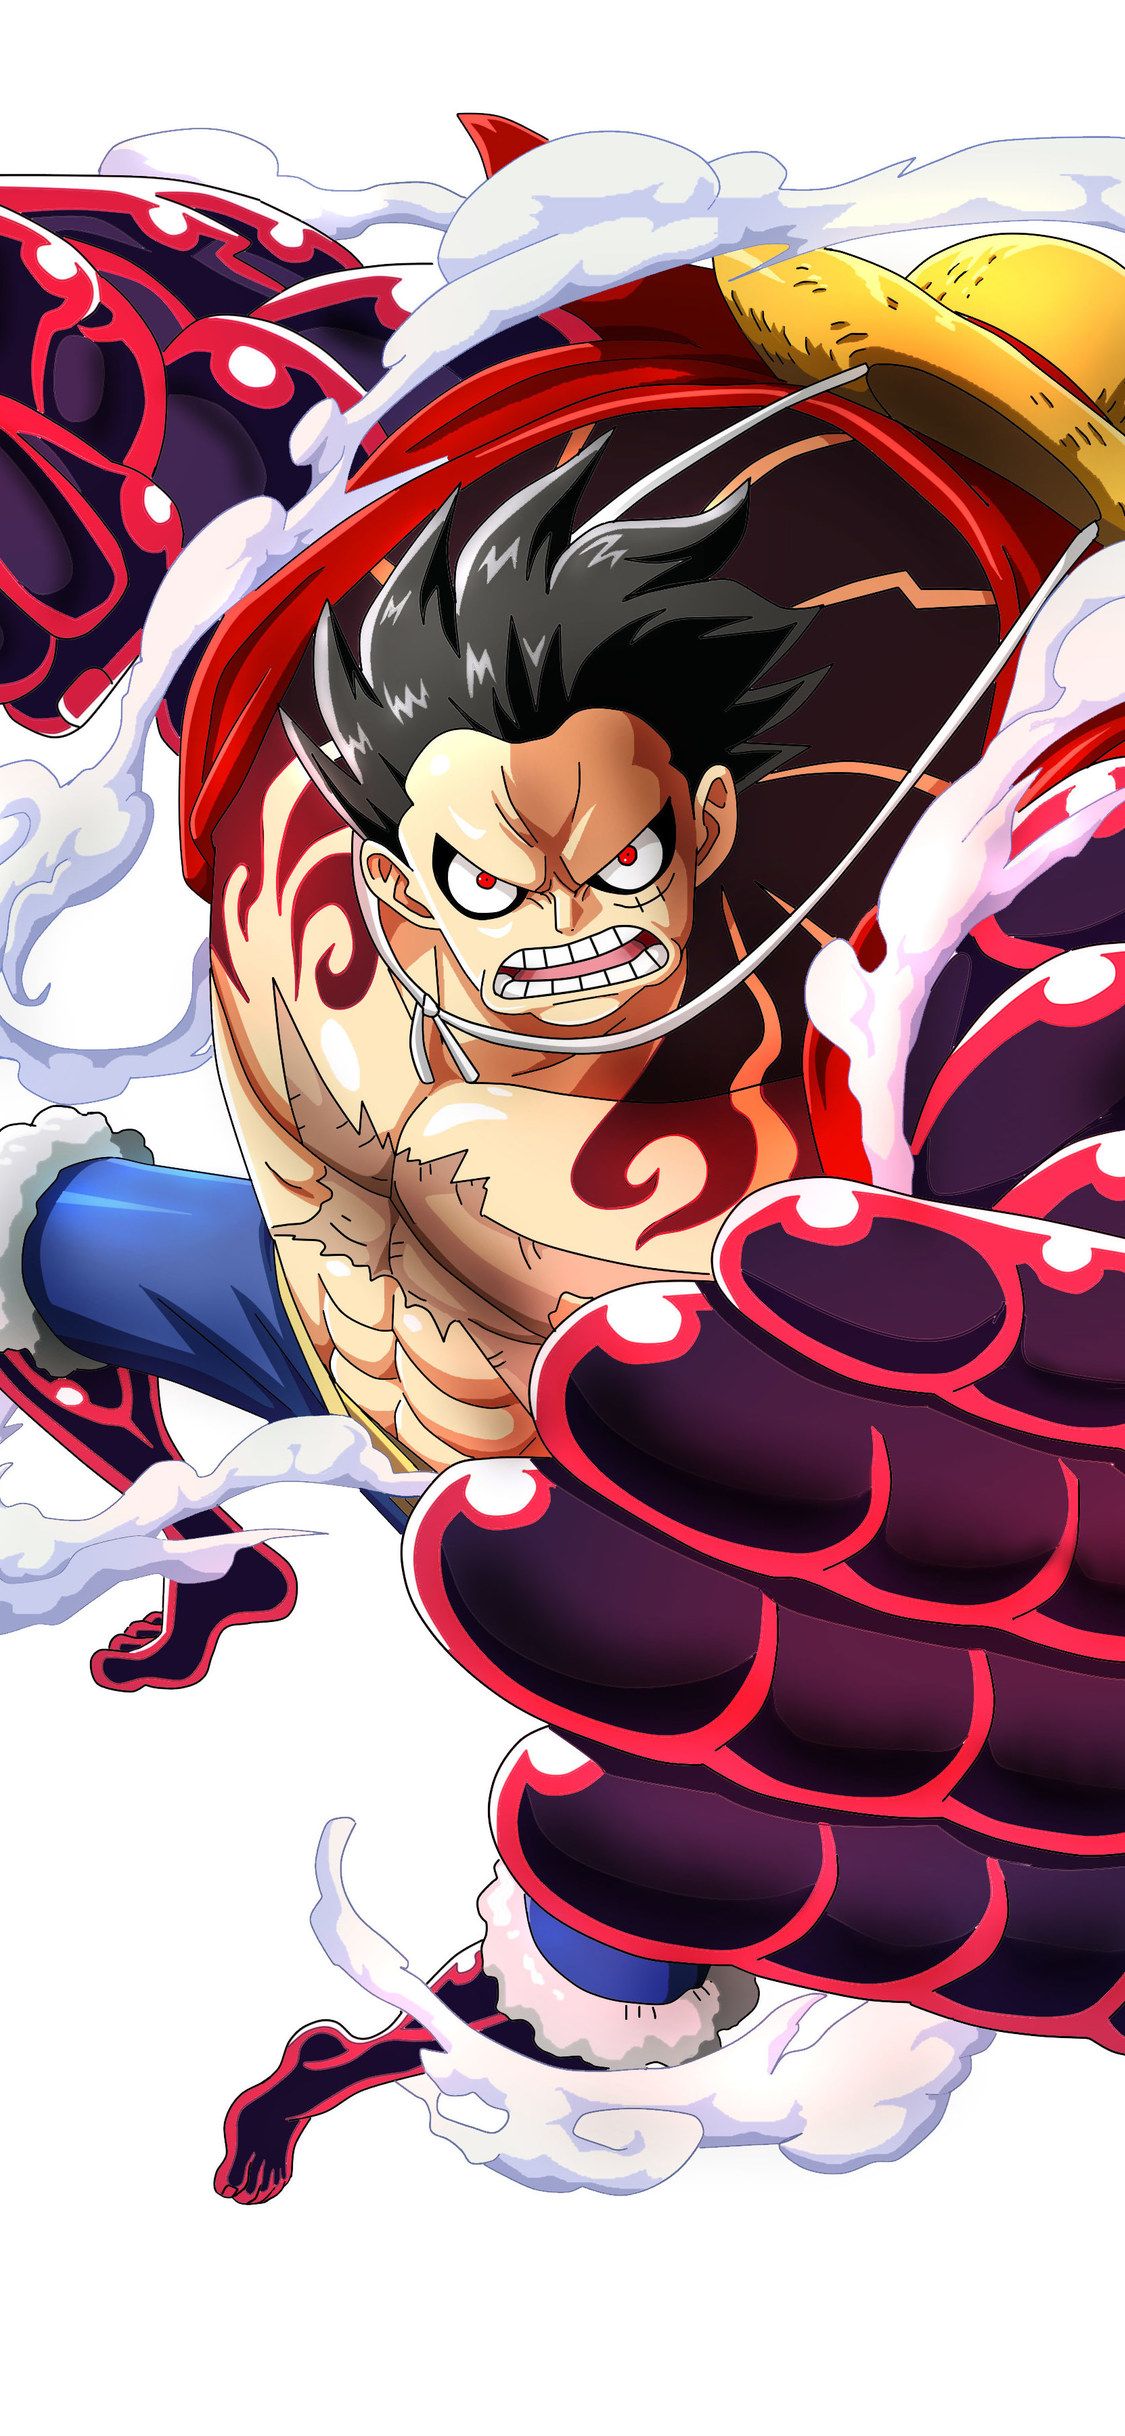 iPhone Wallpaper HD Luffy One Piece by miahatake13 on DeviantArt